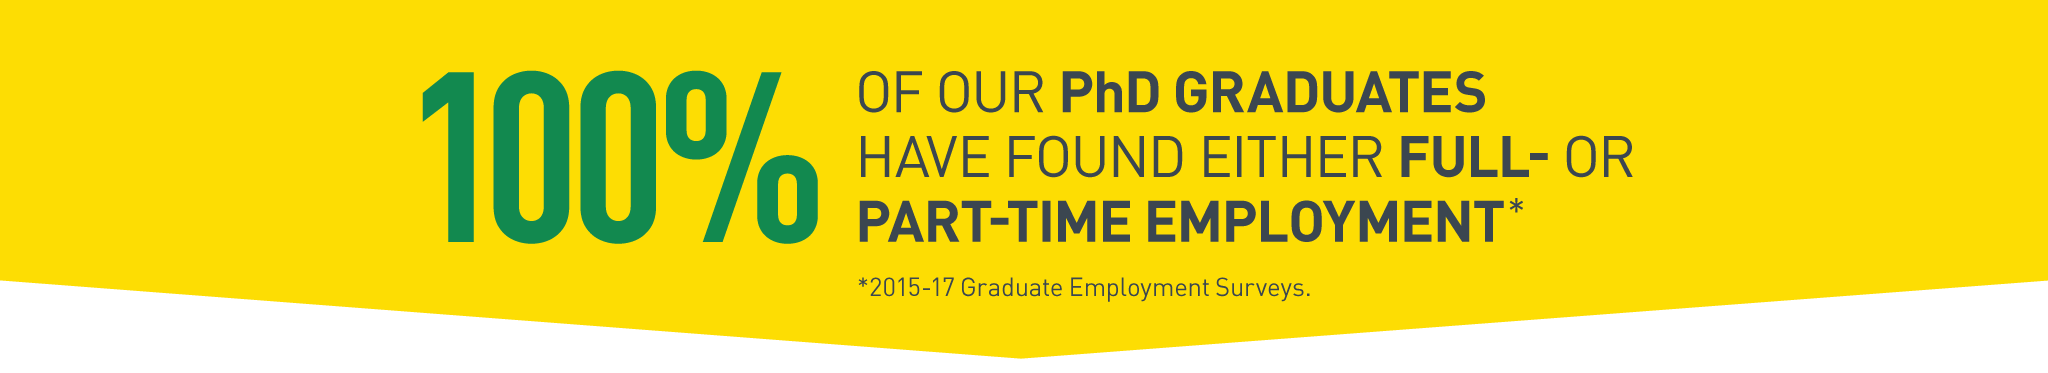 100% of our PhD graduates have found either full- or part-time employment.